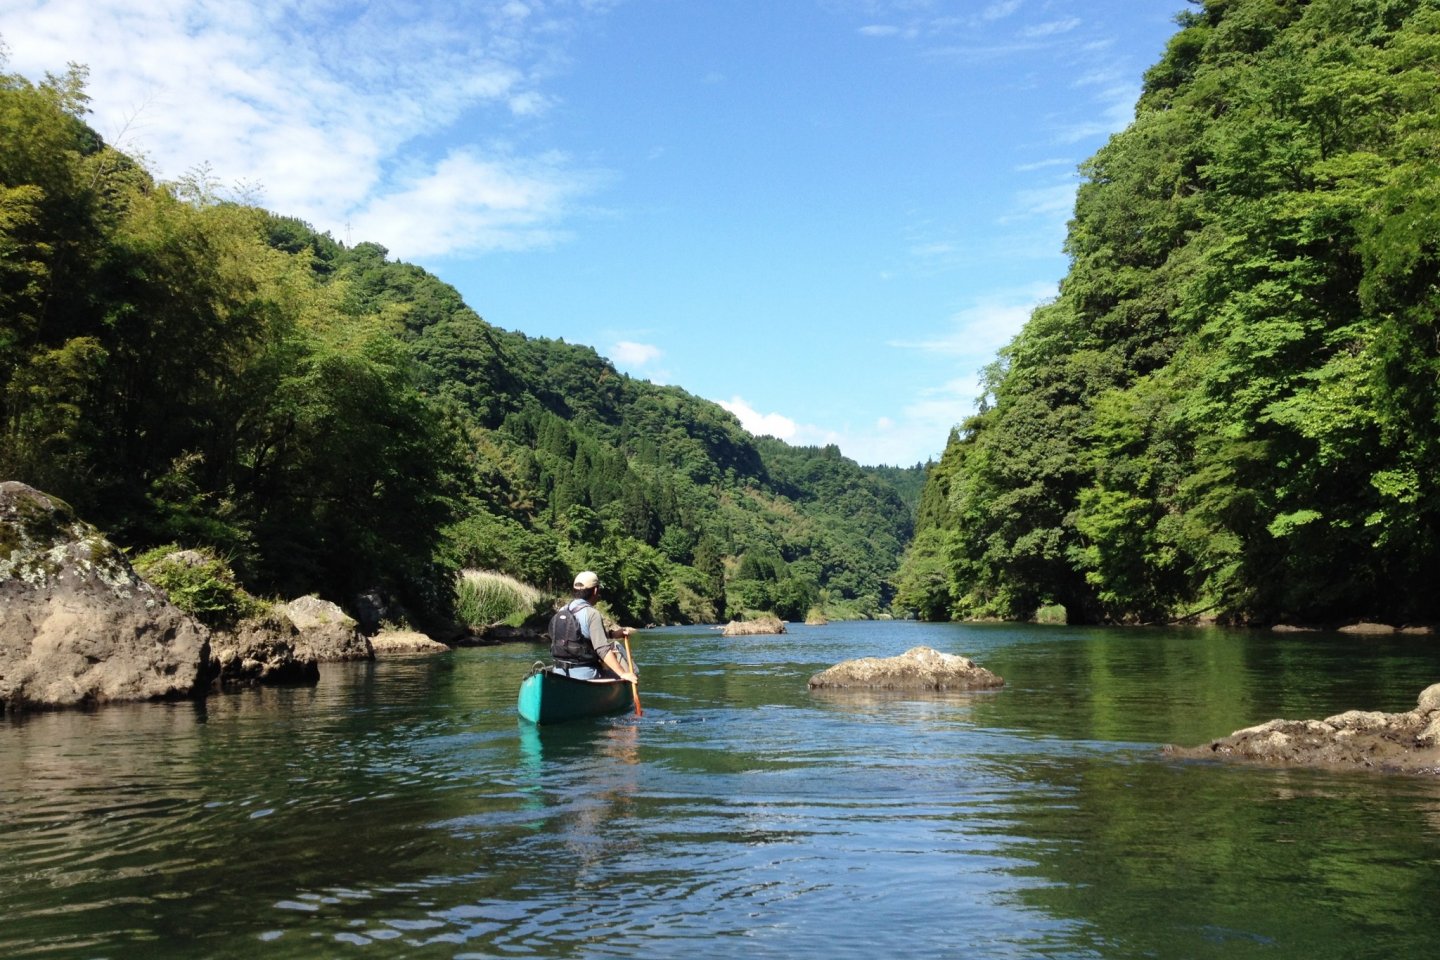 Tomosuke Noda, canoeist, told Makoto Shina that he can see a different view each time he paddles. 